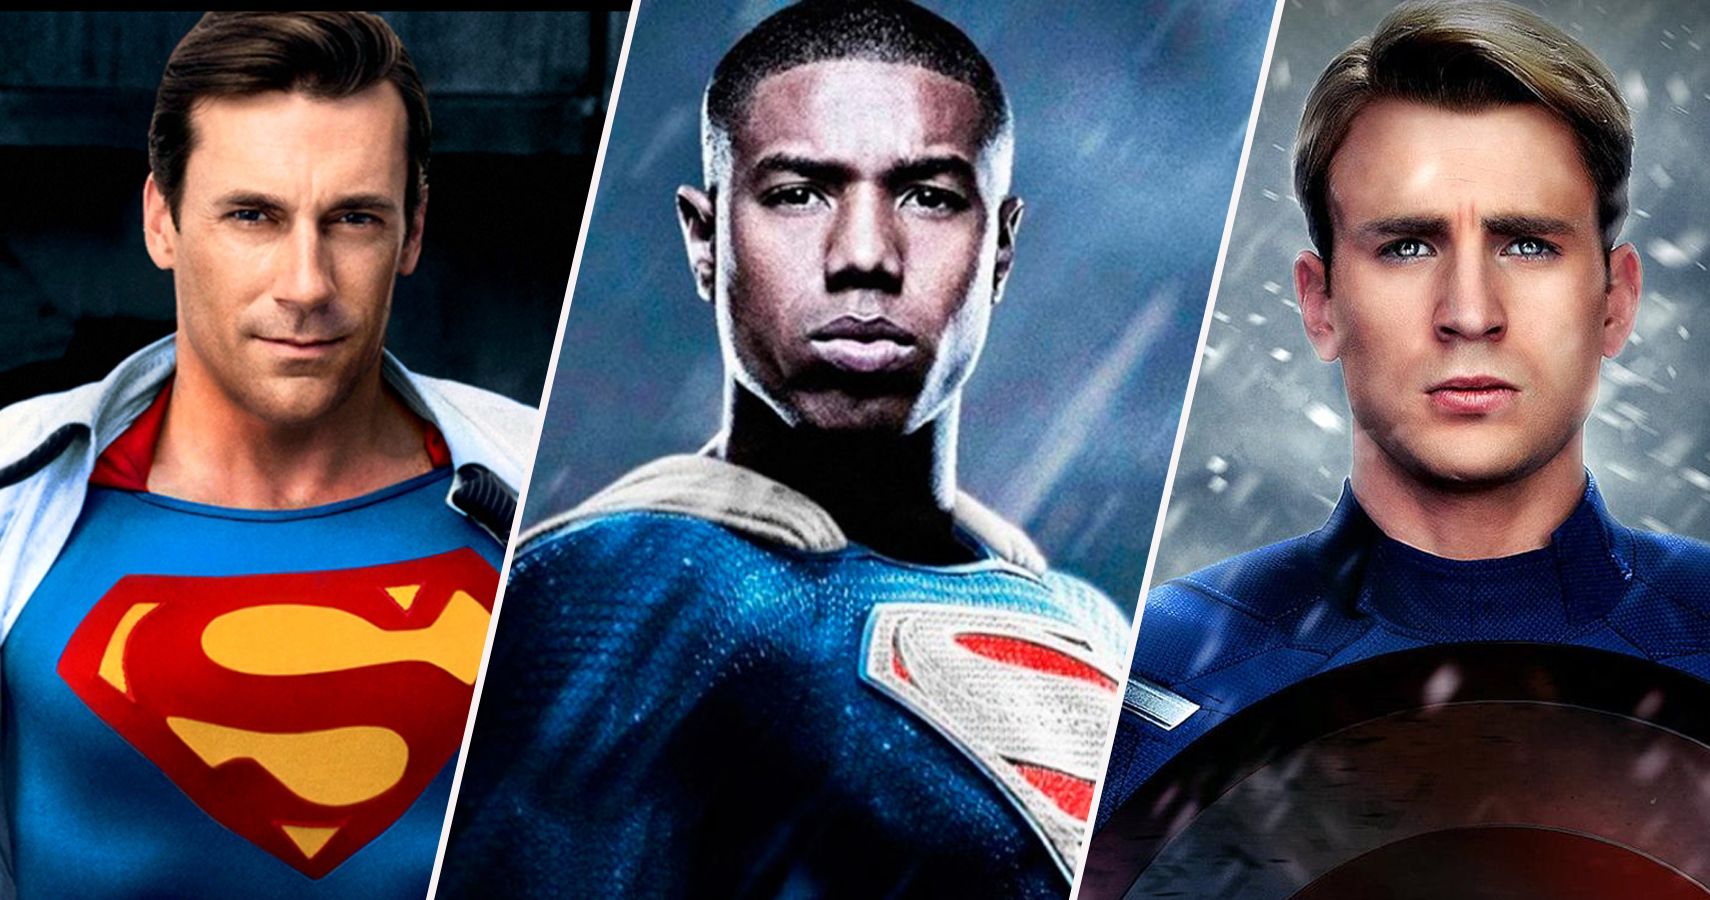 Who Will Be The Next Superman? — The Three Actors In The Running